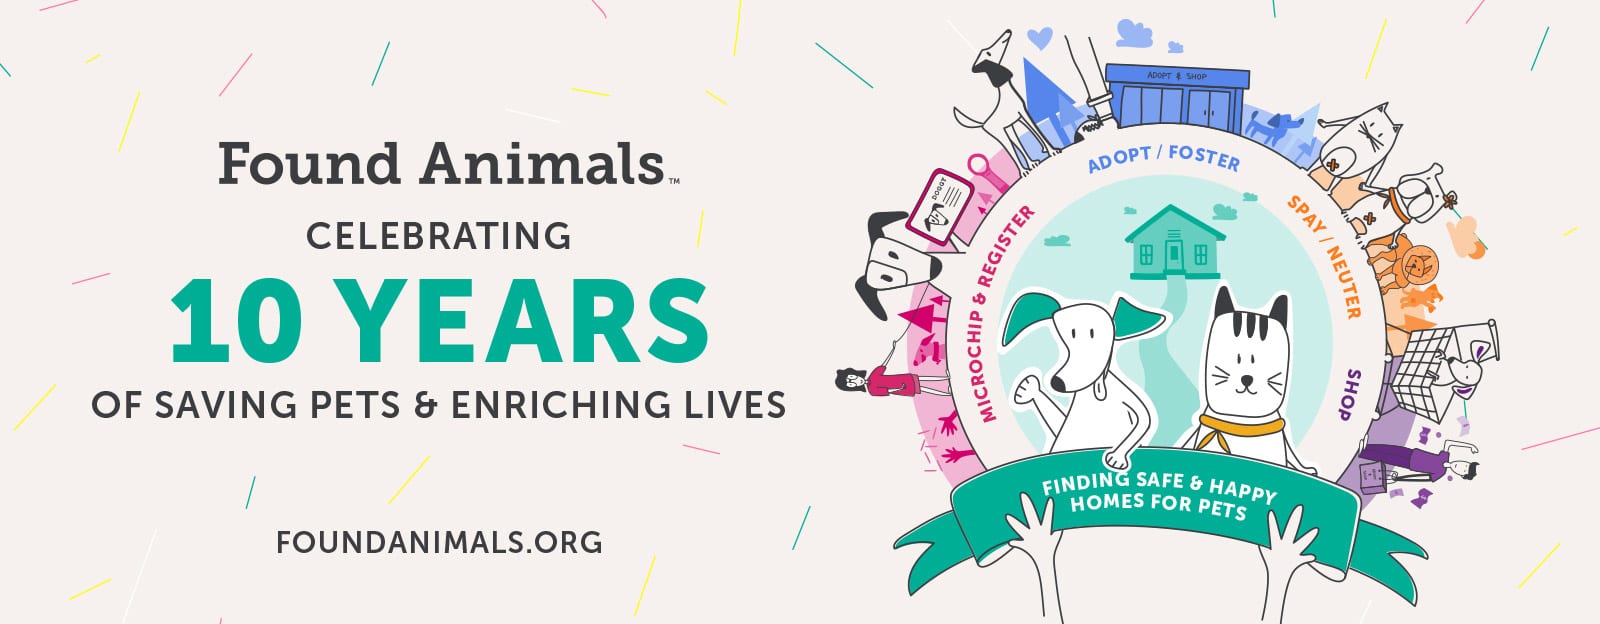 Michelson Found Animals Celebrates 10 Years of Helping Millions of Pets Nationwide